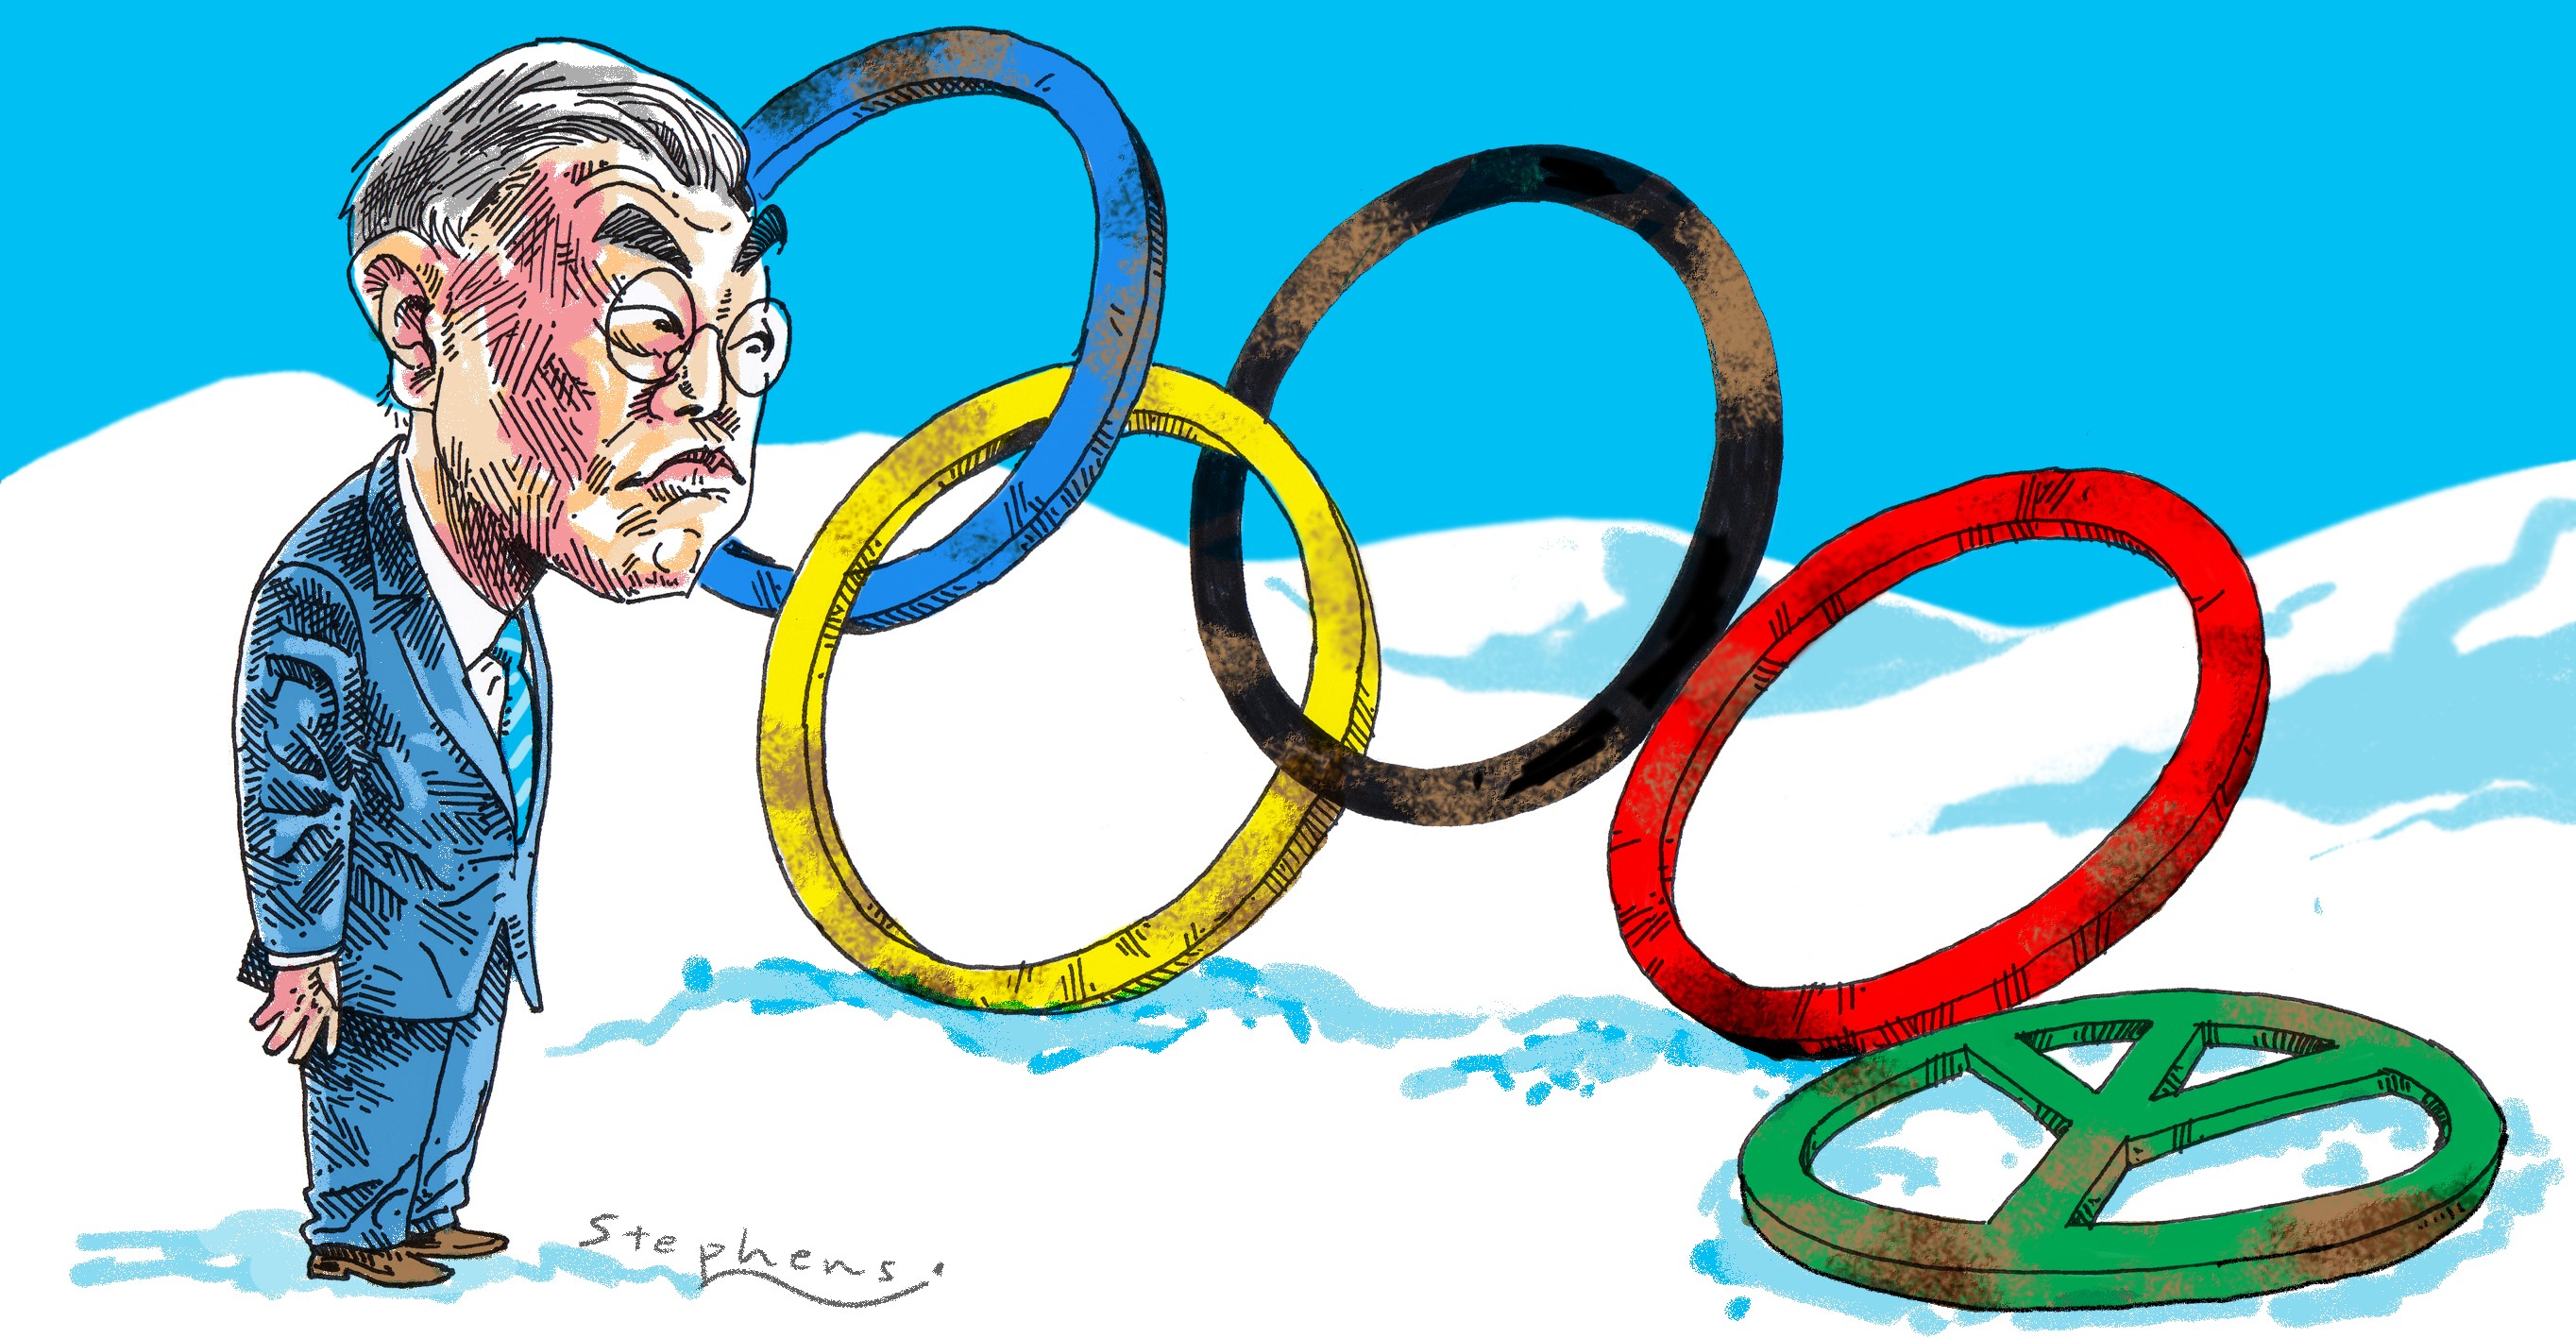 South Korean President Moon Jae-in’s wishful thinking, reckoning that the international event could be used as a springboard to talks with the stubborn North and expand an opportunity to bring about a nuclear-free Korean peninsula, hardly seems feasible now. Illustration: Craig Stephens